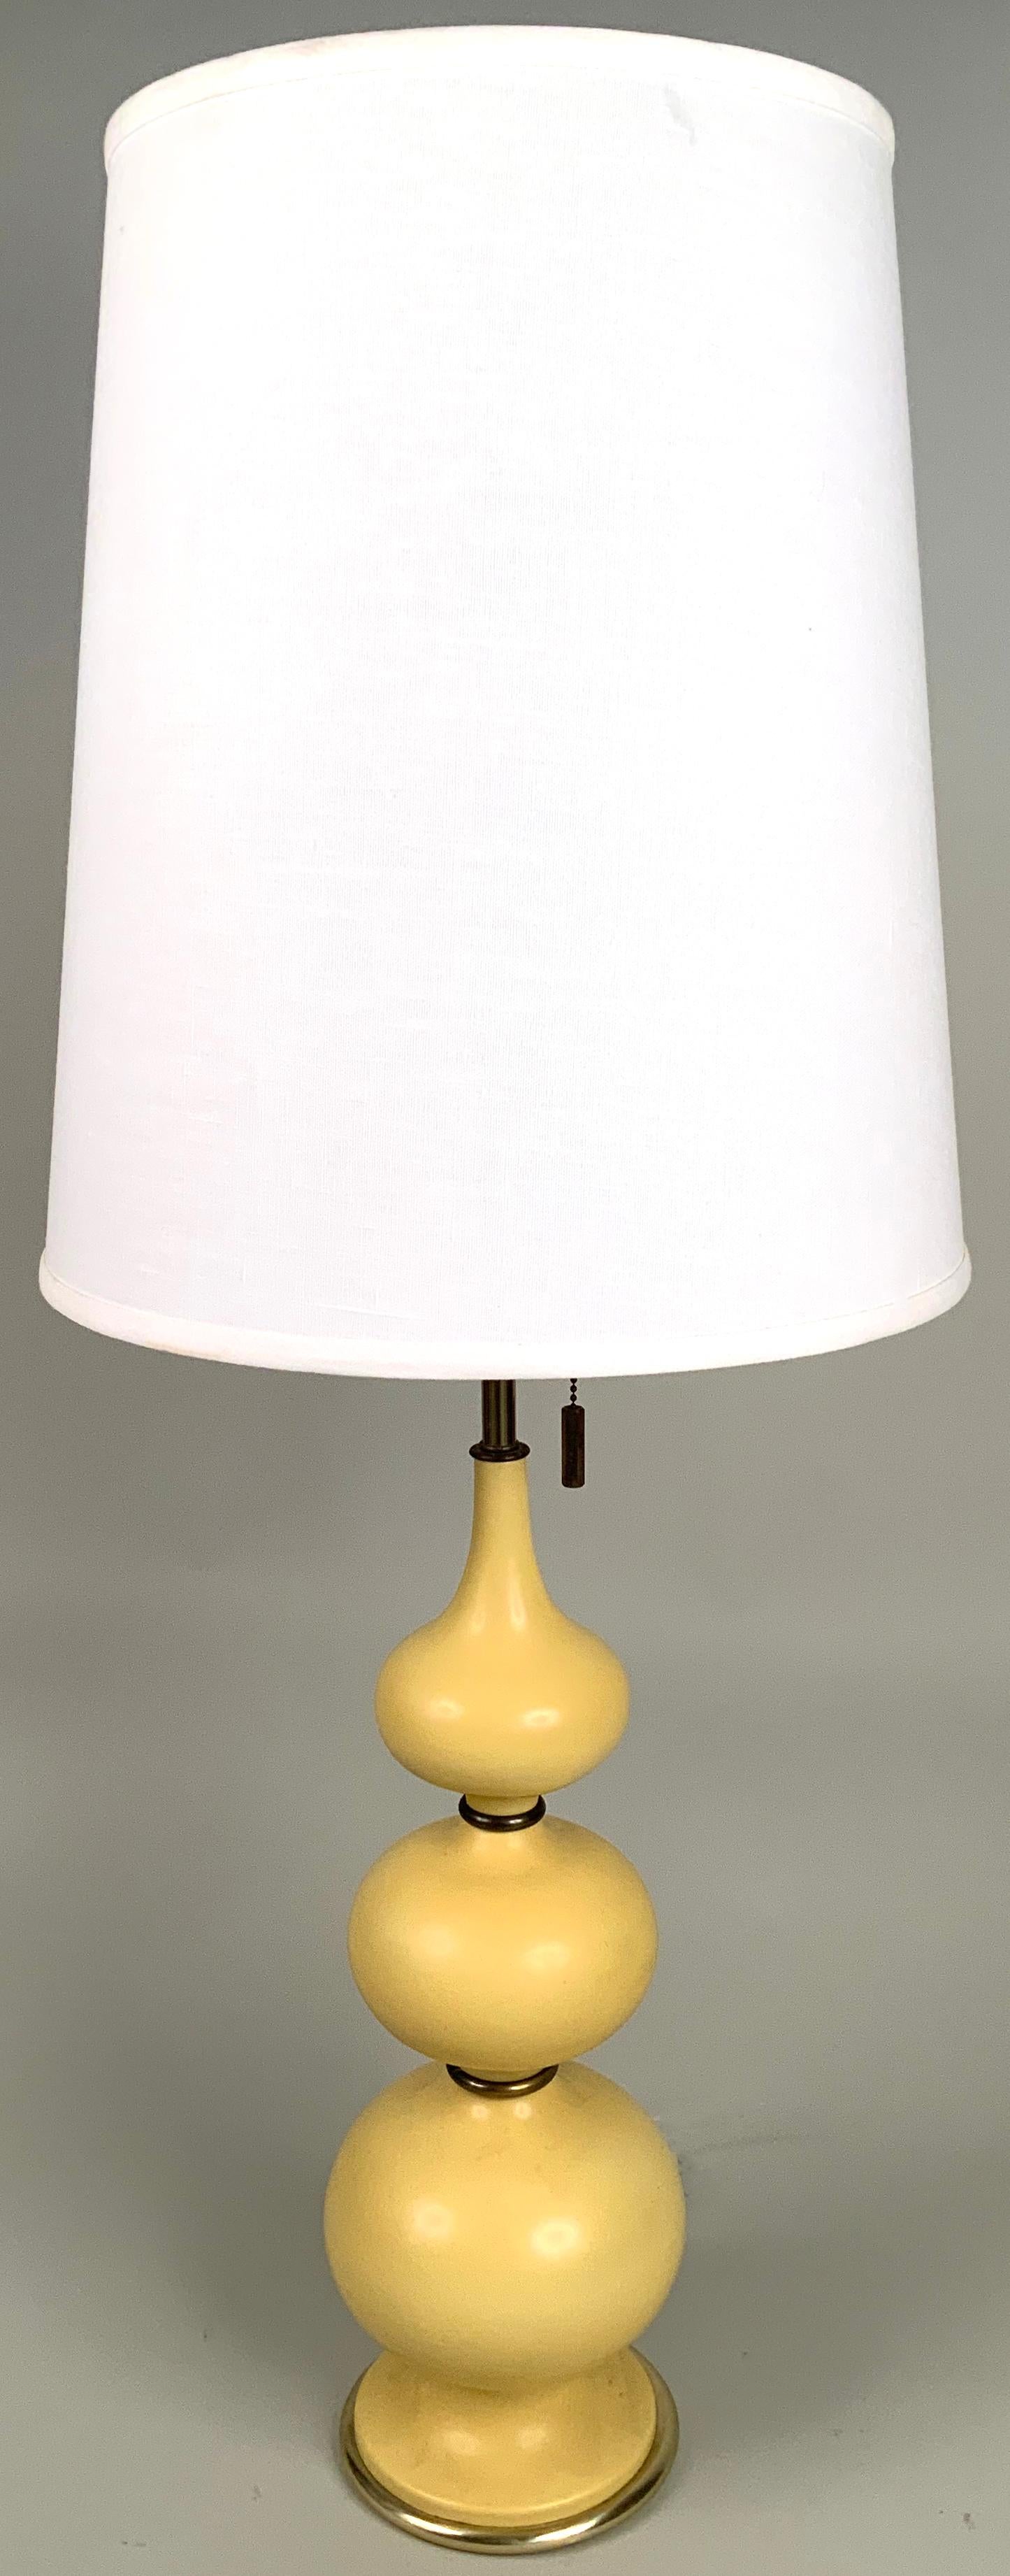 A beautiful pair of vintage 1960s table lamps designed by Gerald Thurston for Lightolier. the bases with a series of graduated ceramic orb shaped, separated by brass rings, in a pale butter yellow. both with Ligholier's signature three socket